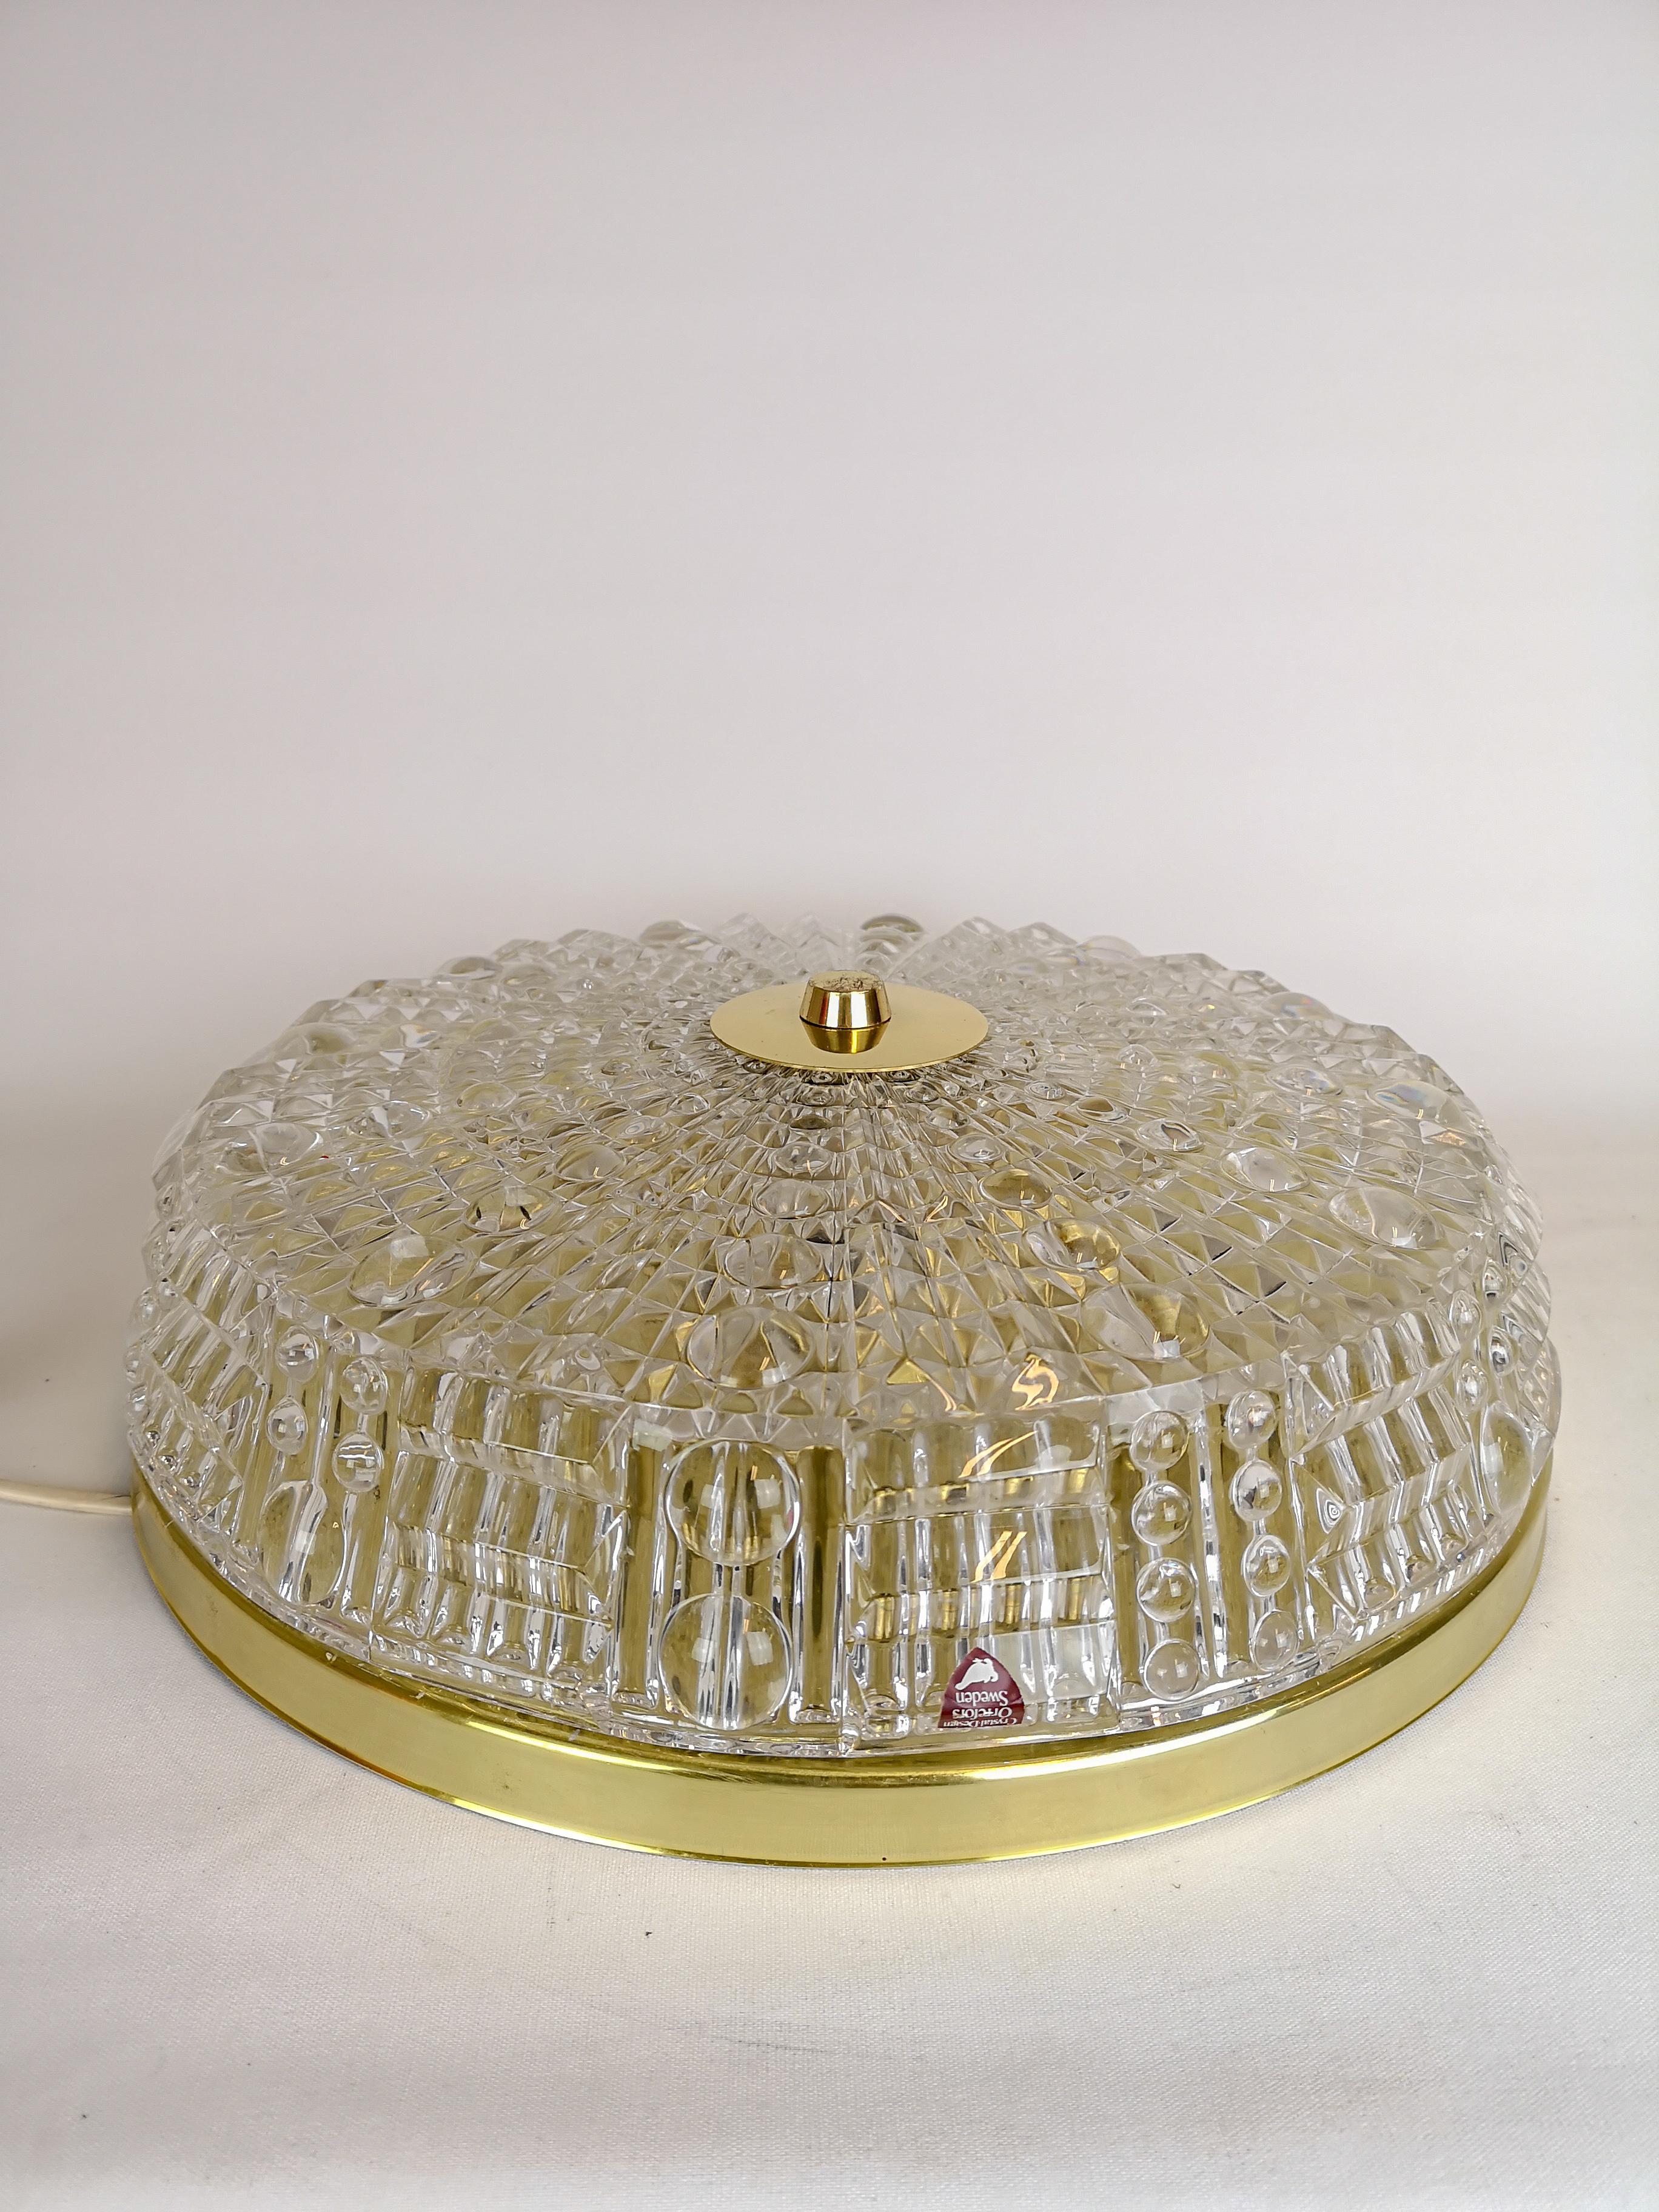 Midcentury crystal glass and brass ceiling light fixture, circa mid-1970s. Made at Orrefors and Designed by Carl Fagerlund. This lovely example is pressed clear crystal glass with brass accents. 

Good working condition. 

Measures: D 40 cm, H